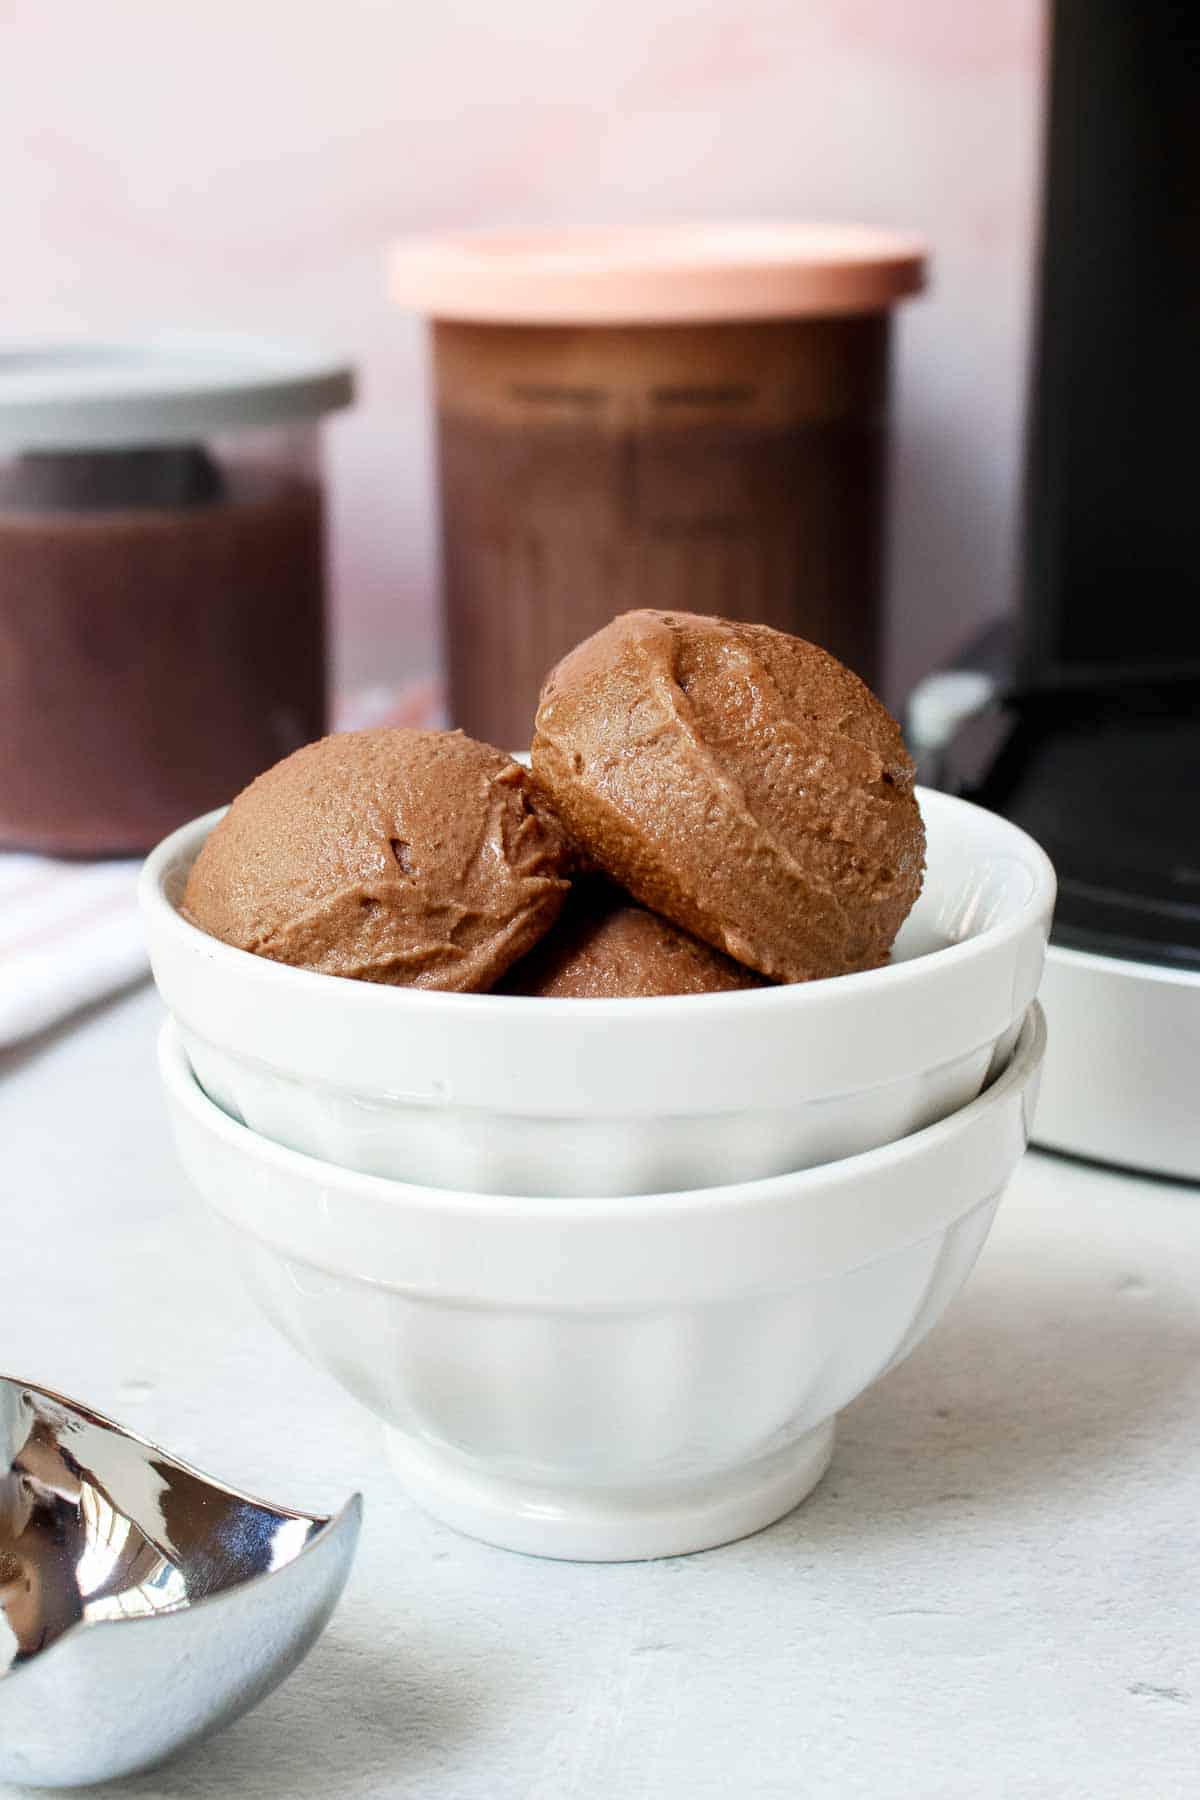 Scoops of Ninja Creami Chocolate Protein Ice Cream in a small bowl